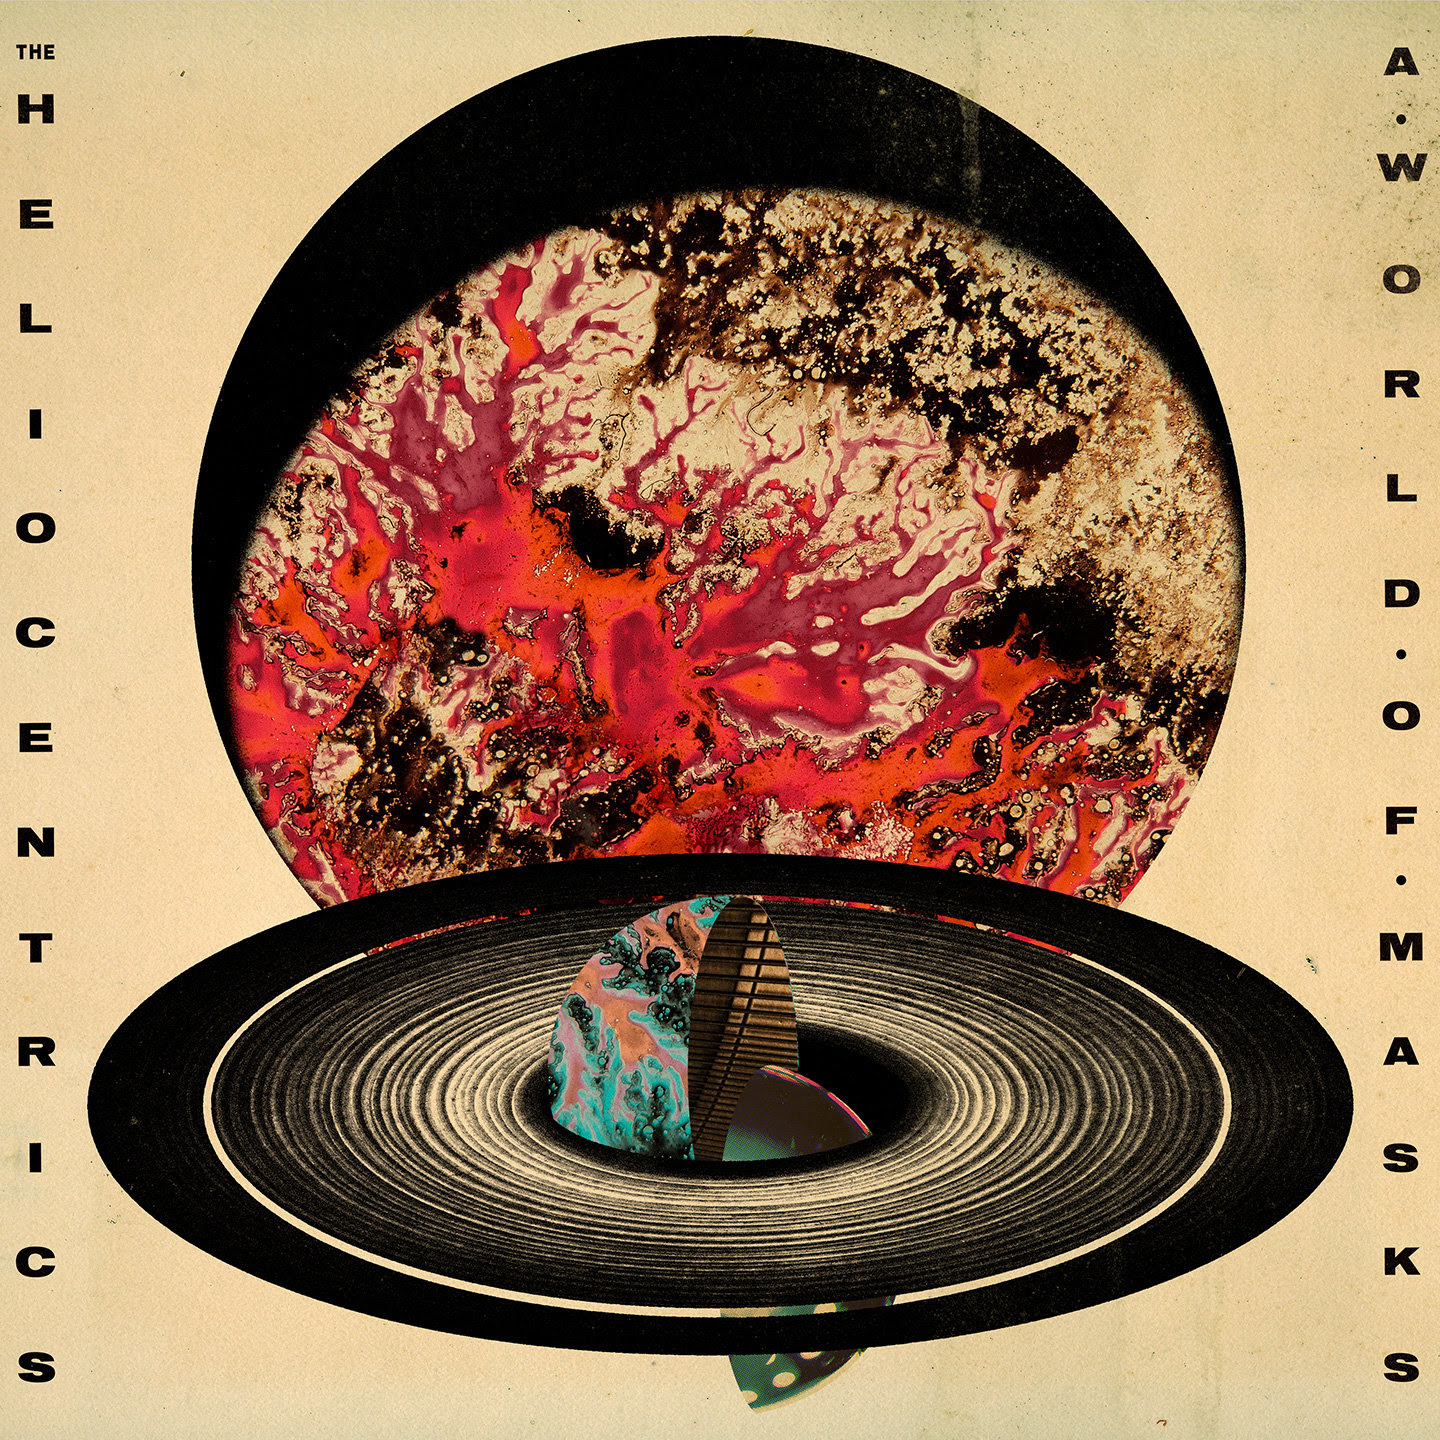 Review: A World of Masks by The Heliocentrics (Soundway Records)